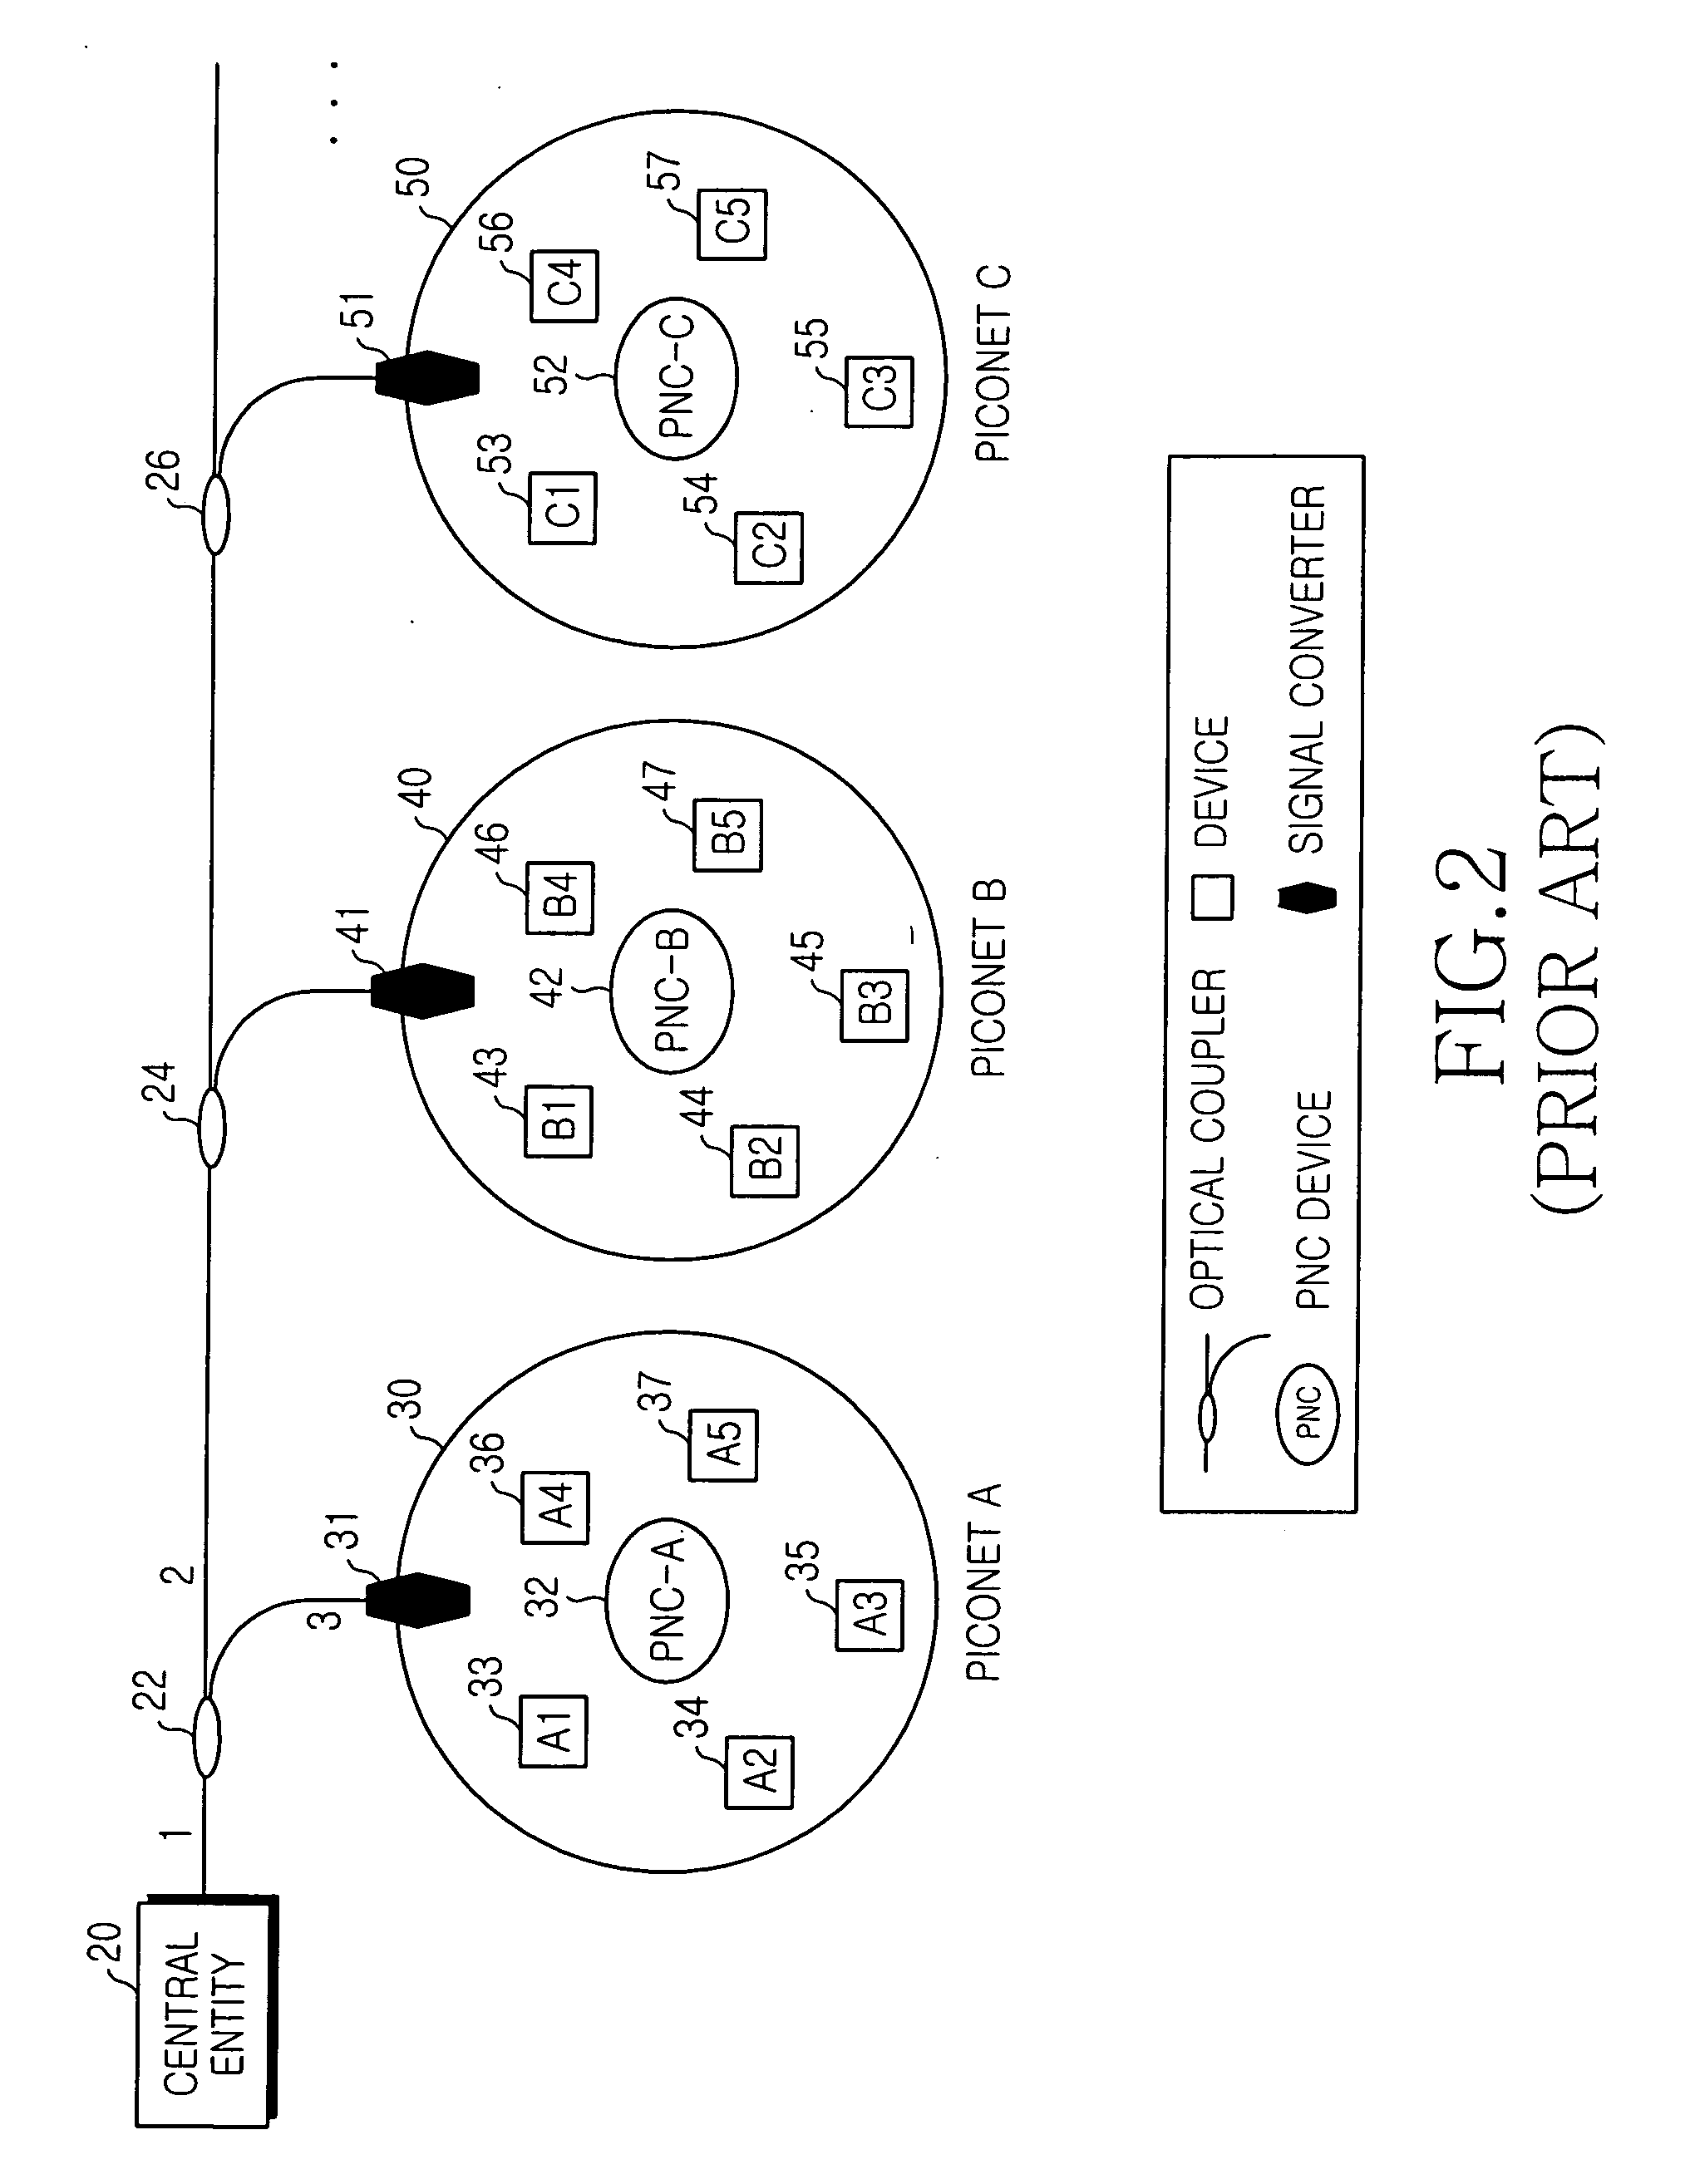 High-speed wireless personal area network system for extending service area